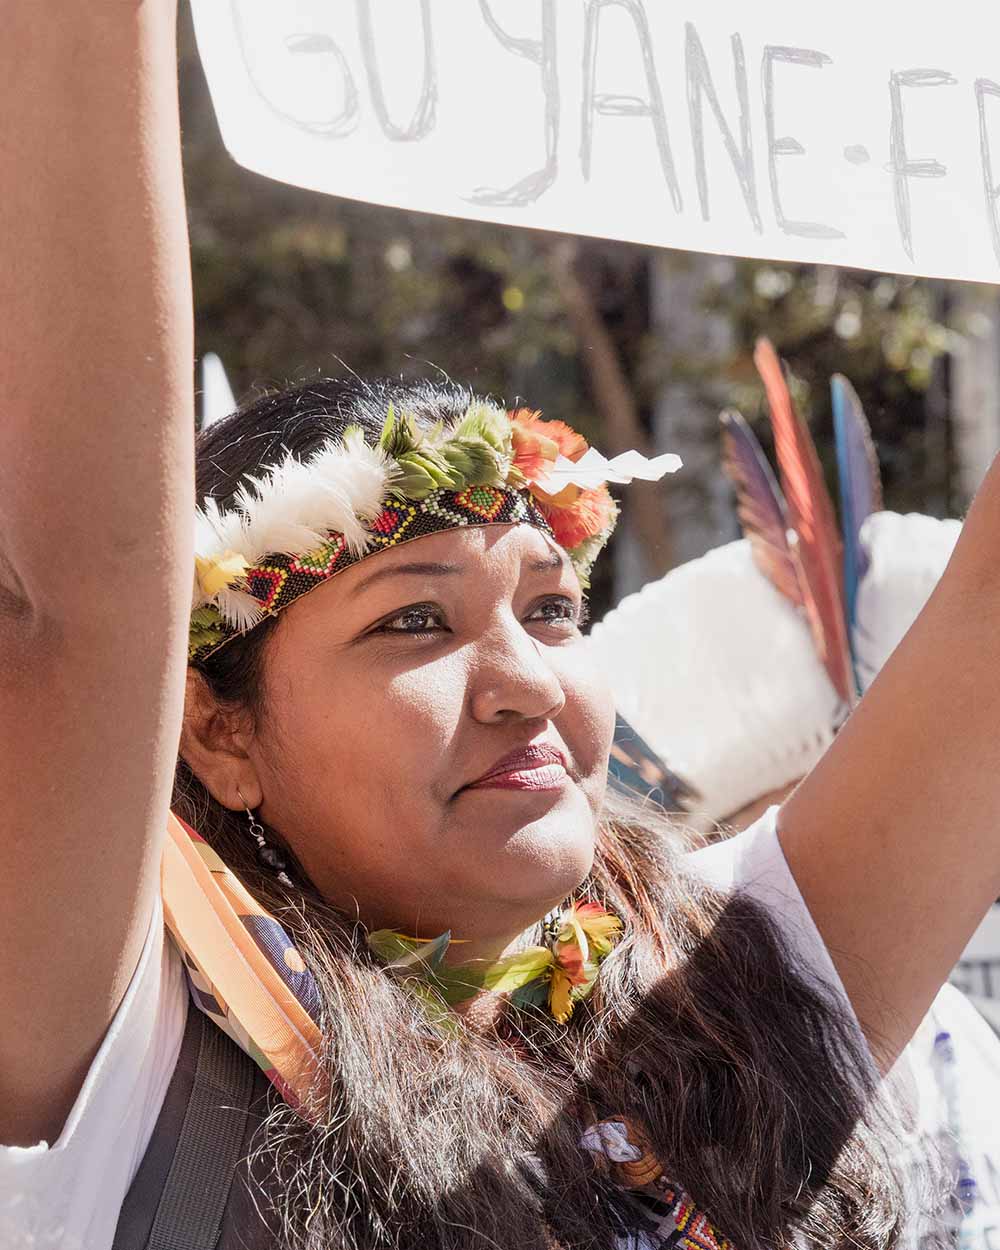 An Indigenous woman with long black hair and a white t-shirt wearing a feather headdress holding a sign at a protest.